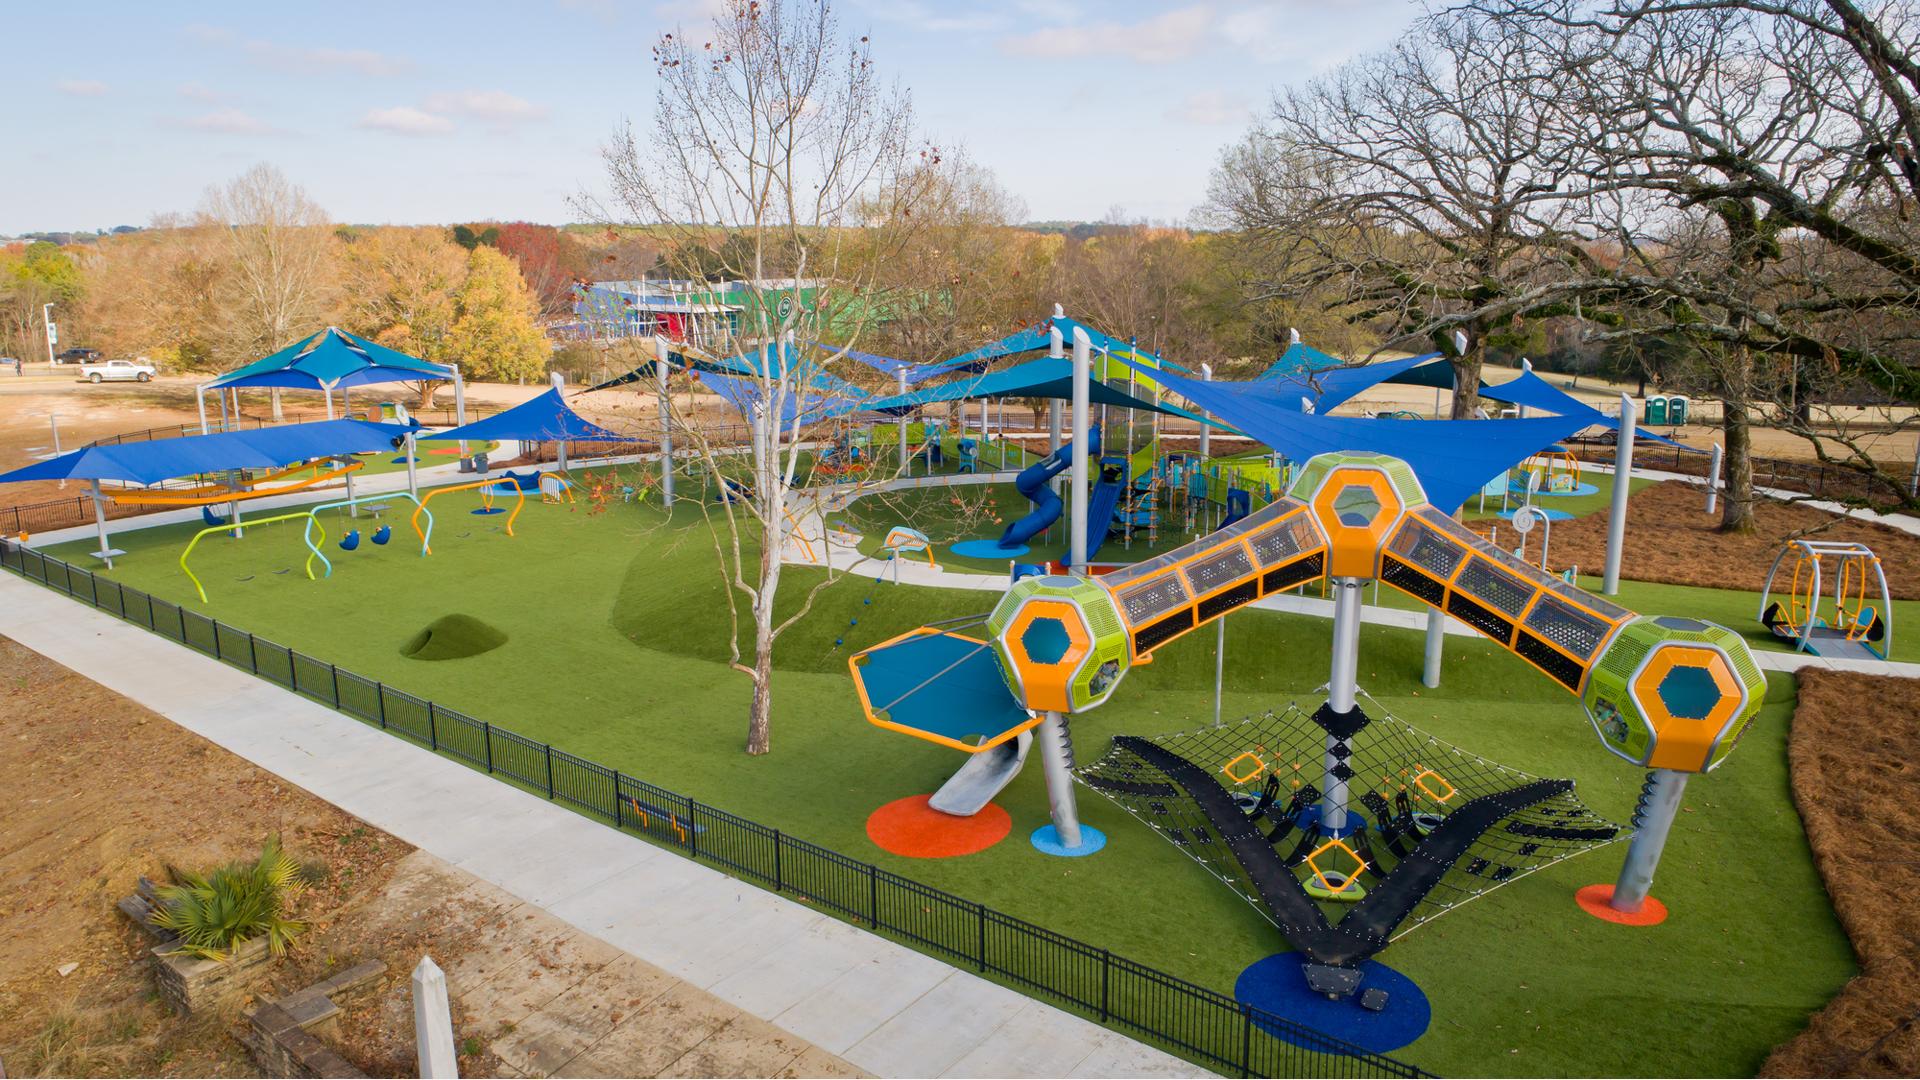 Elevated view of a play area surrounded by a black iron fence. Three towers with hexagonal play pods are connected by enclosed crawl tunnels in the foreground while triangular blue shade sails cover a large play structure and other play activities in the background.  